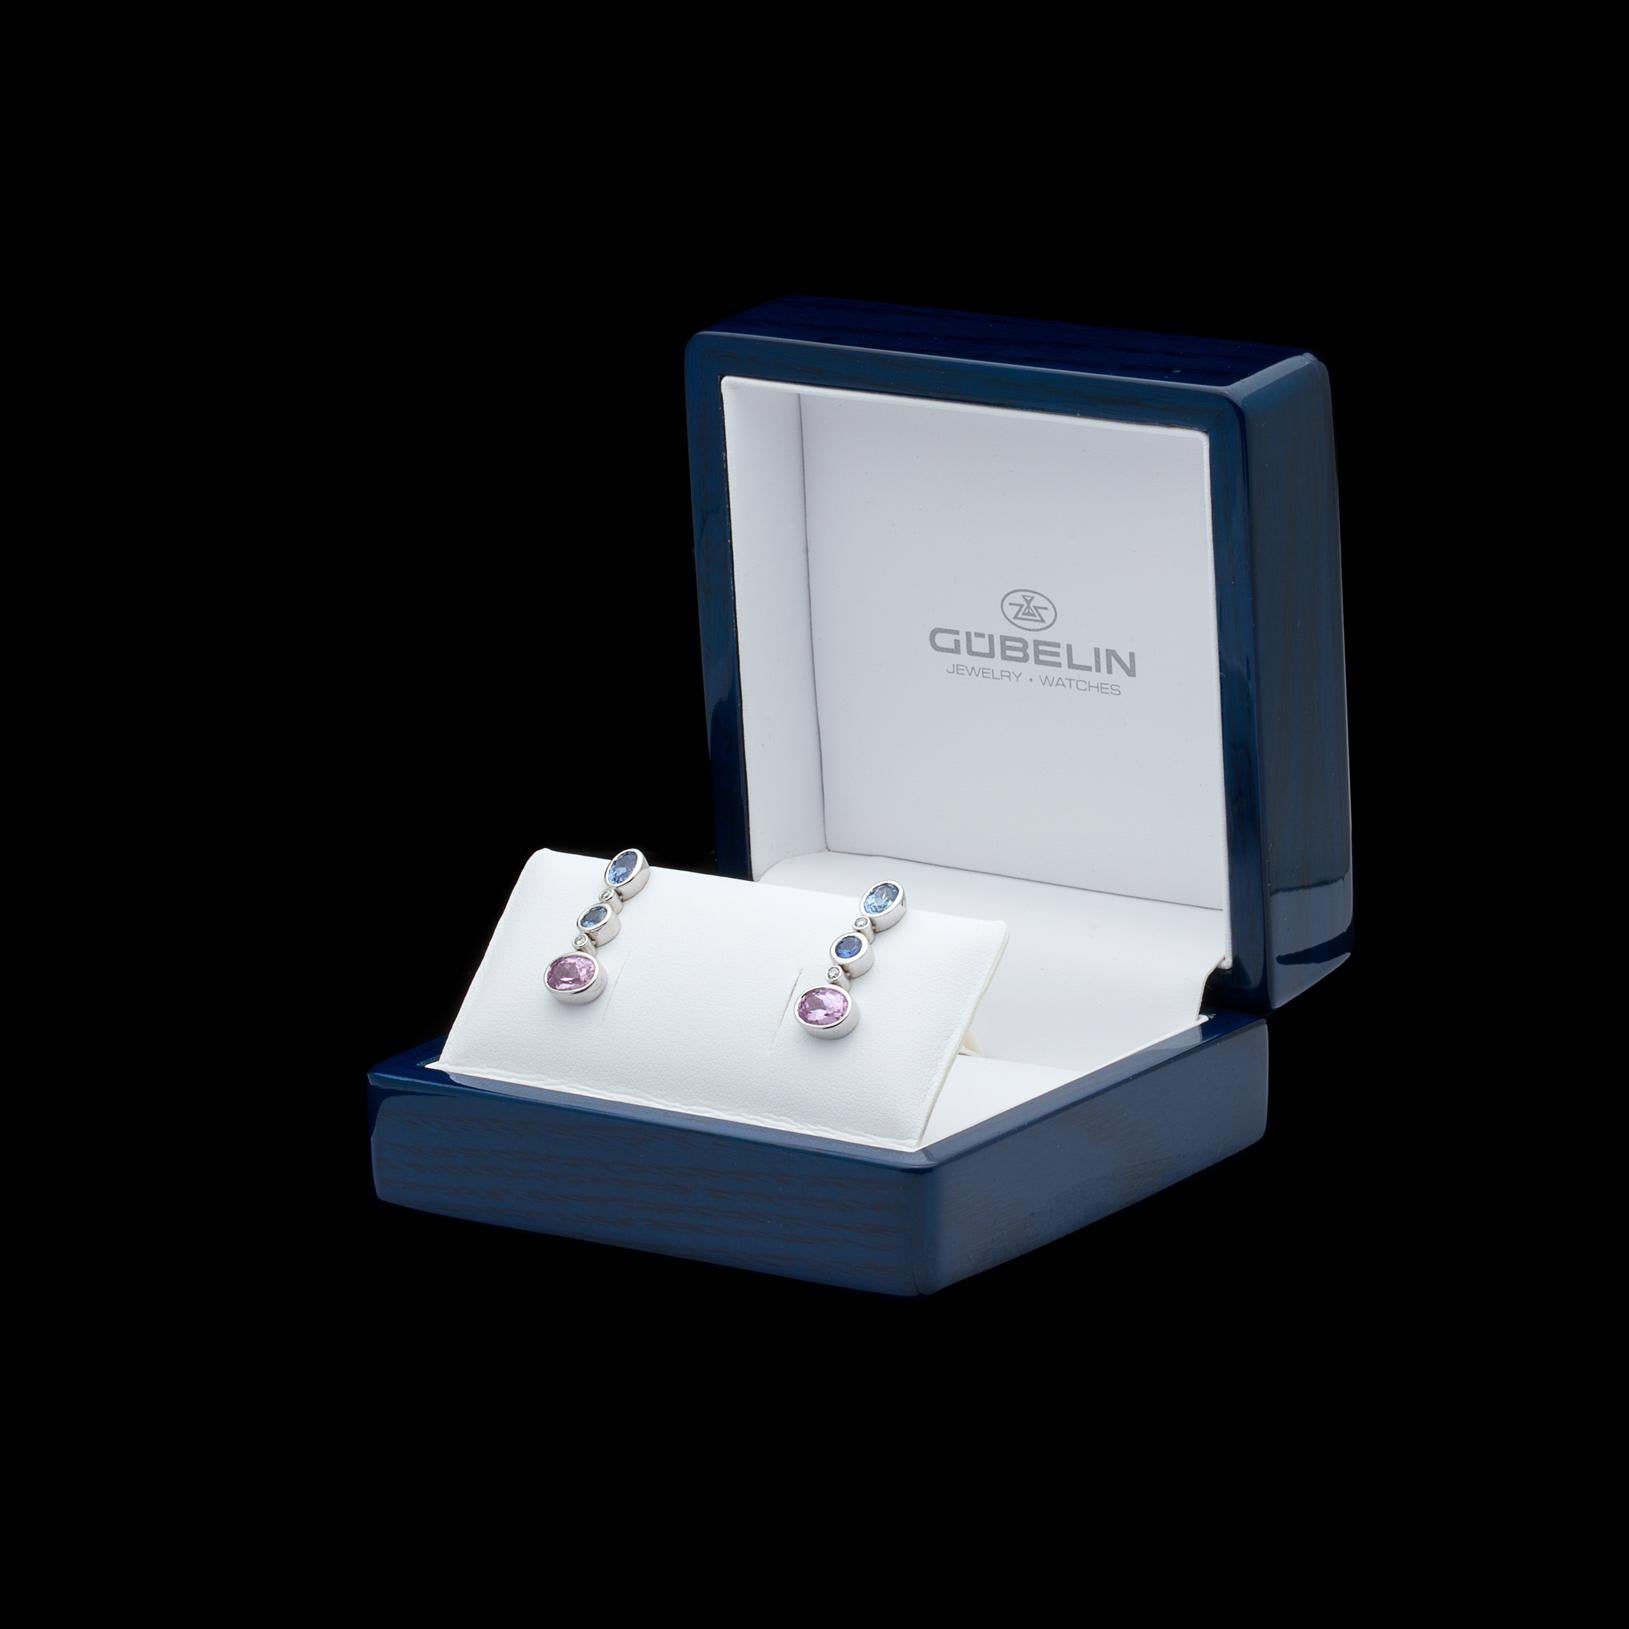 By Swiss designer Gubelin, the 18k white gold earrings feature 6 bezel-set pink and blue sapphires, both oval and round-cut, set between with 4 bezel-set round brilliant-cut diamonds. With a total sapphire weight of 4.33 carats, and diamonds